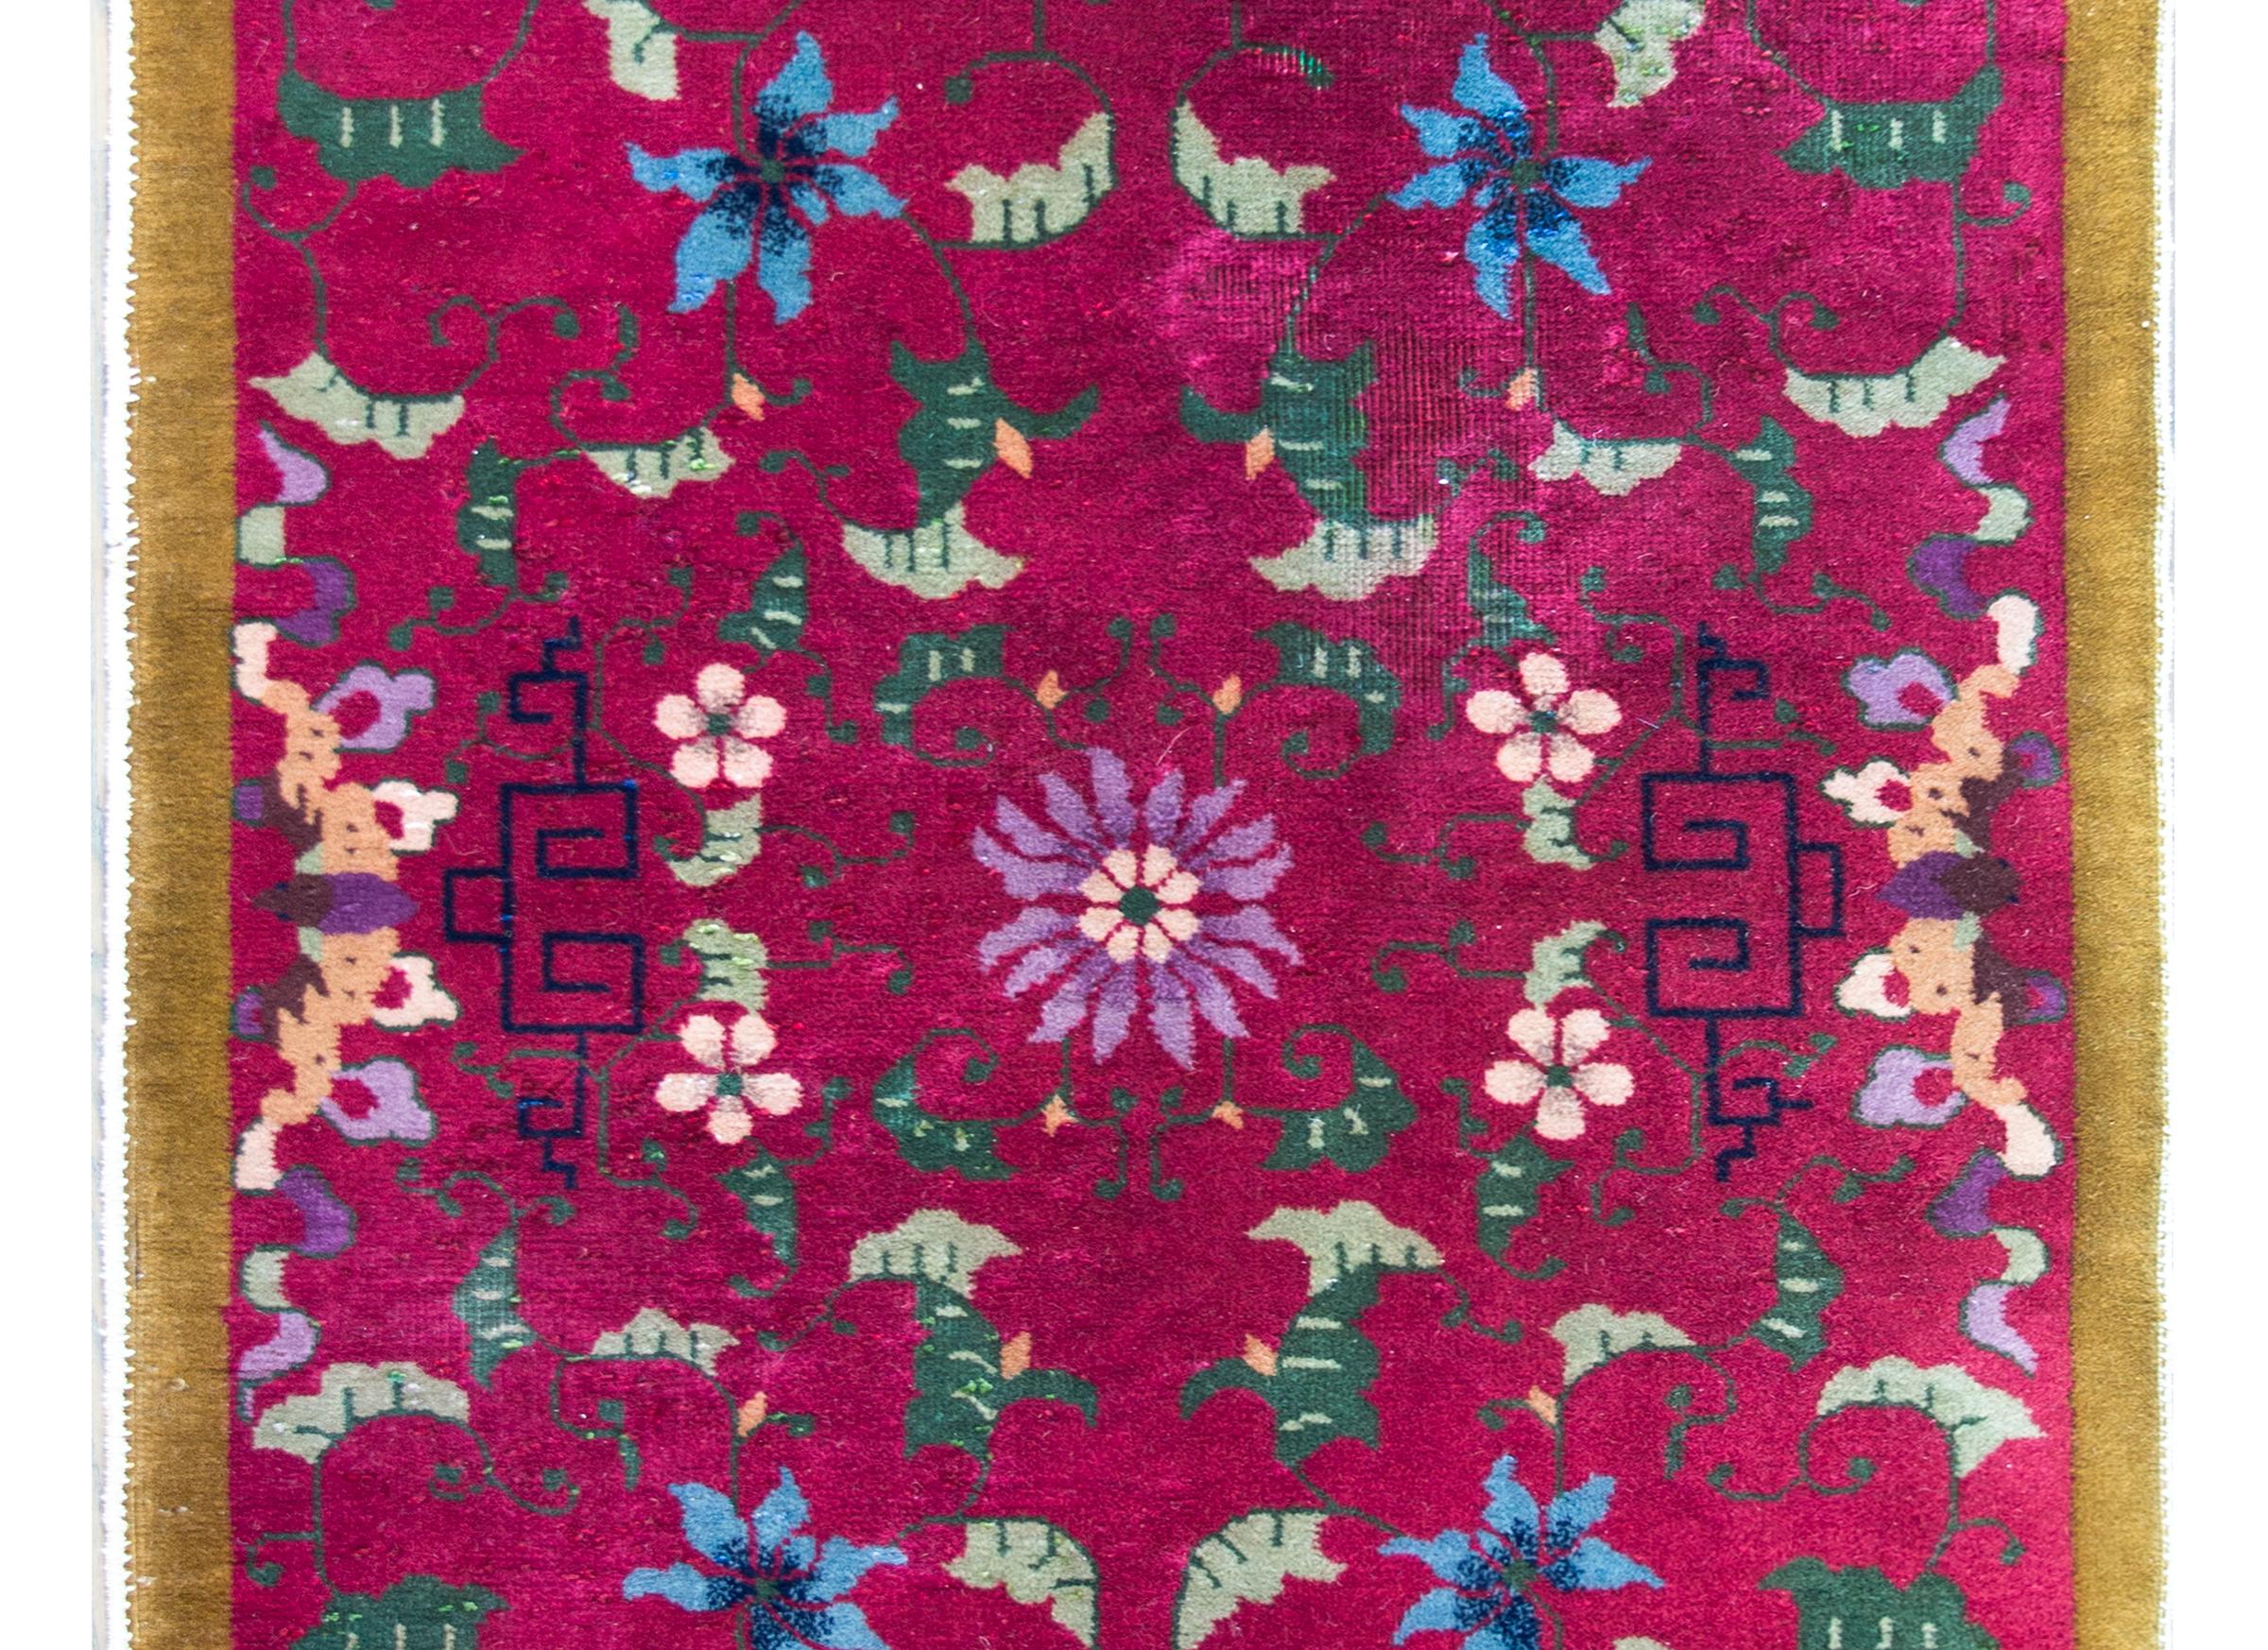 A beautiful early 20th century Chinese Art Deco rug with a central violet chrysanthemum mirrored amidst a mirrored floral and leaf patterned field woven indigo, light and dark green, pink, and orange, and set against a fuchsia background, and